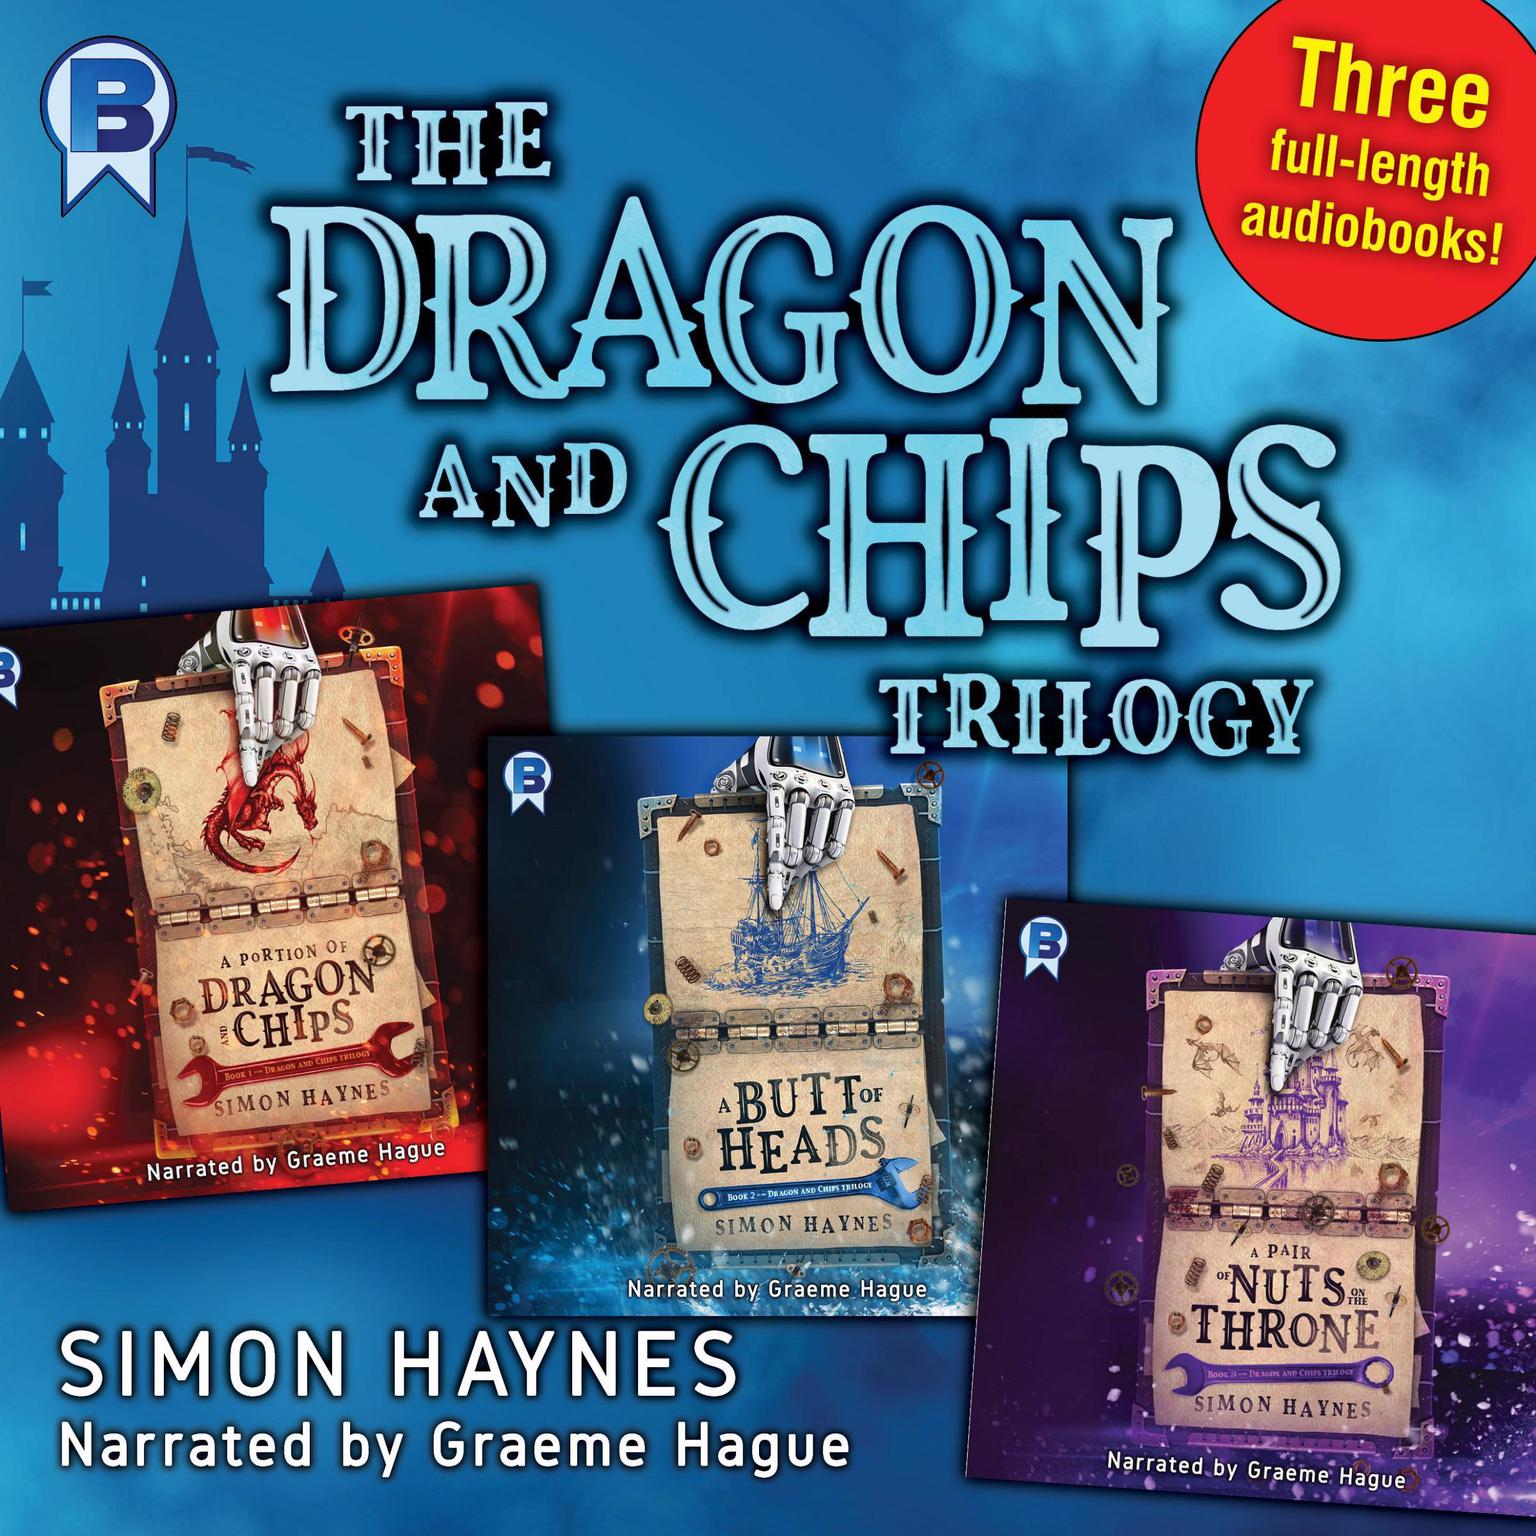 Dragon and Chips Omnibus One: The Complete First Trilogy Audiobook, by Simon Haynes